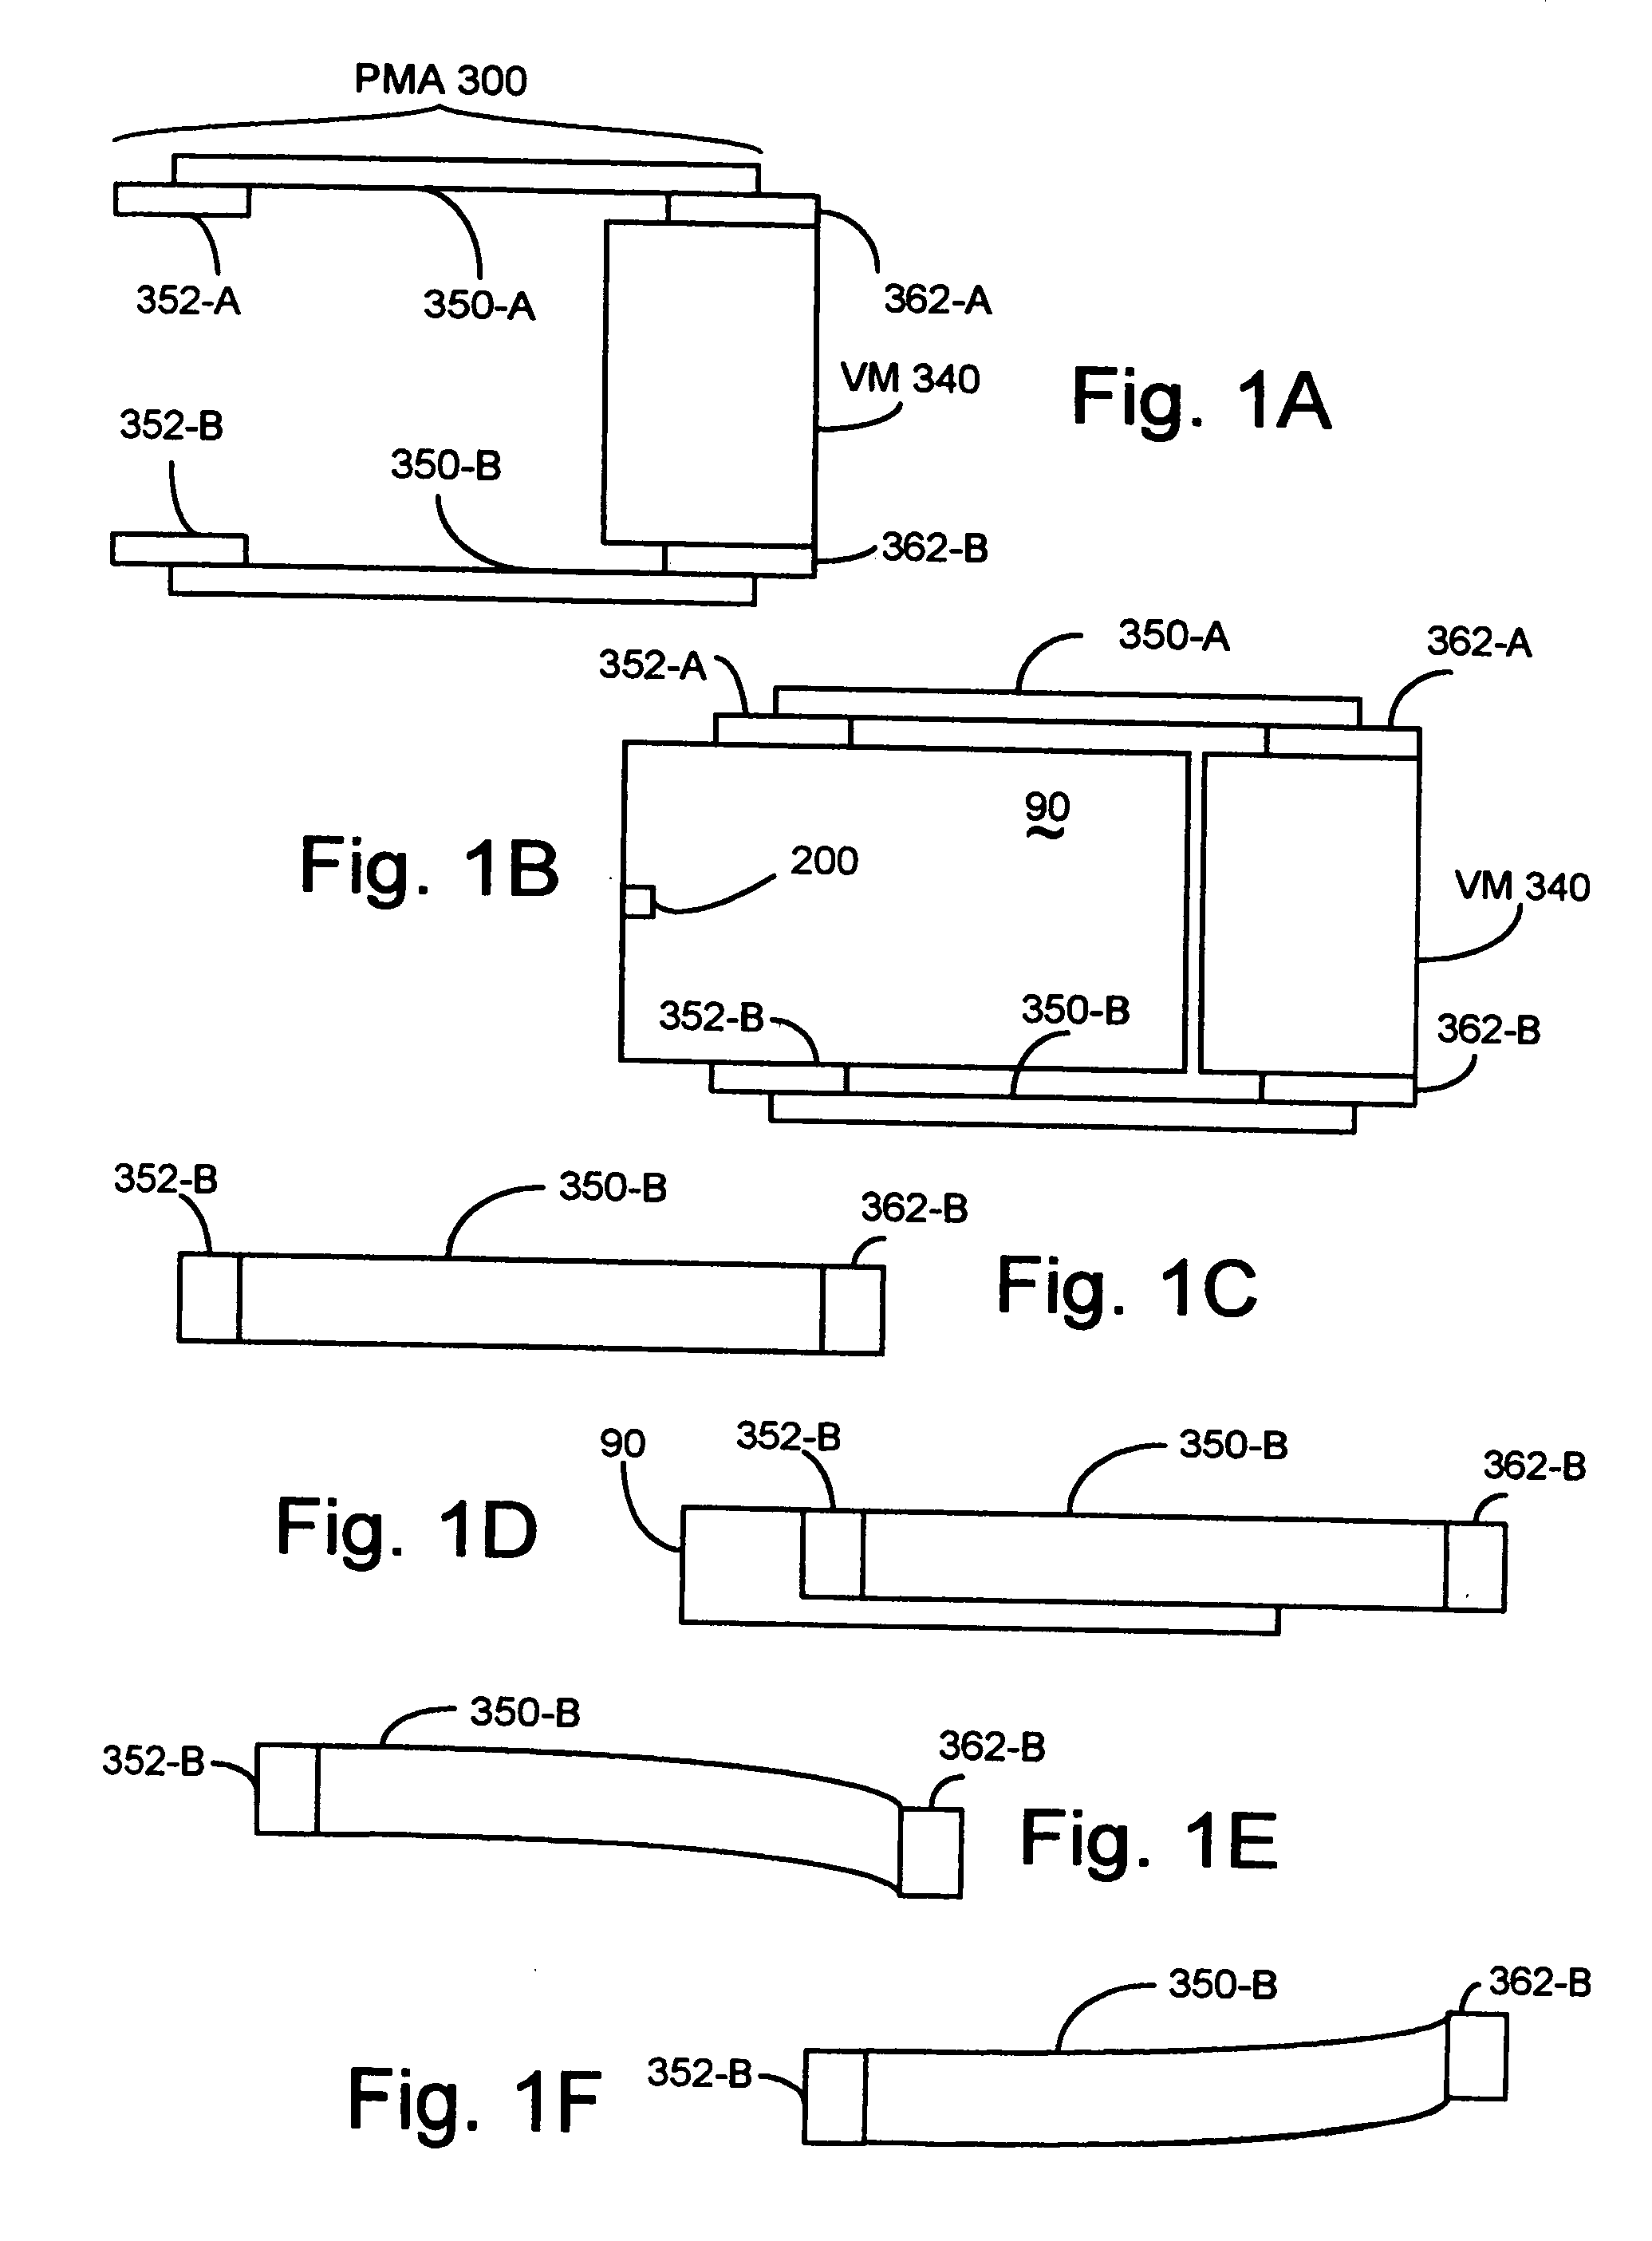 Method and apparatus for a micro-actuator providing three-dimensional positioning to a slider in a hard disk drive